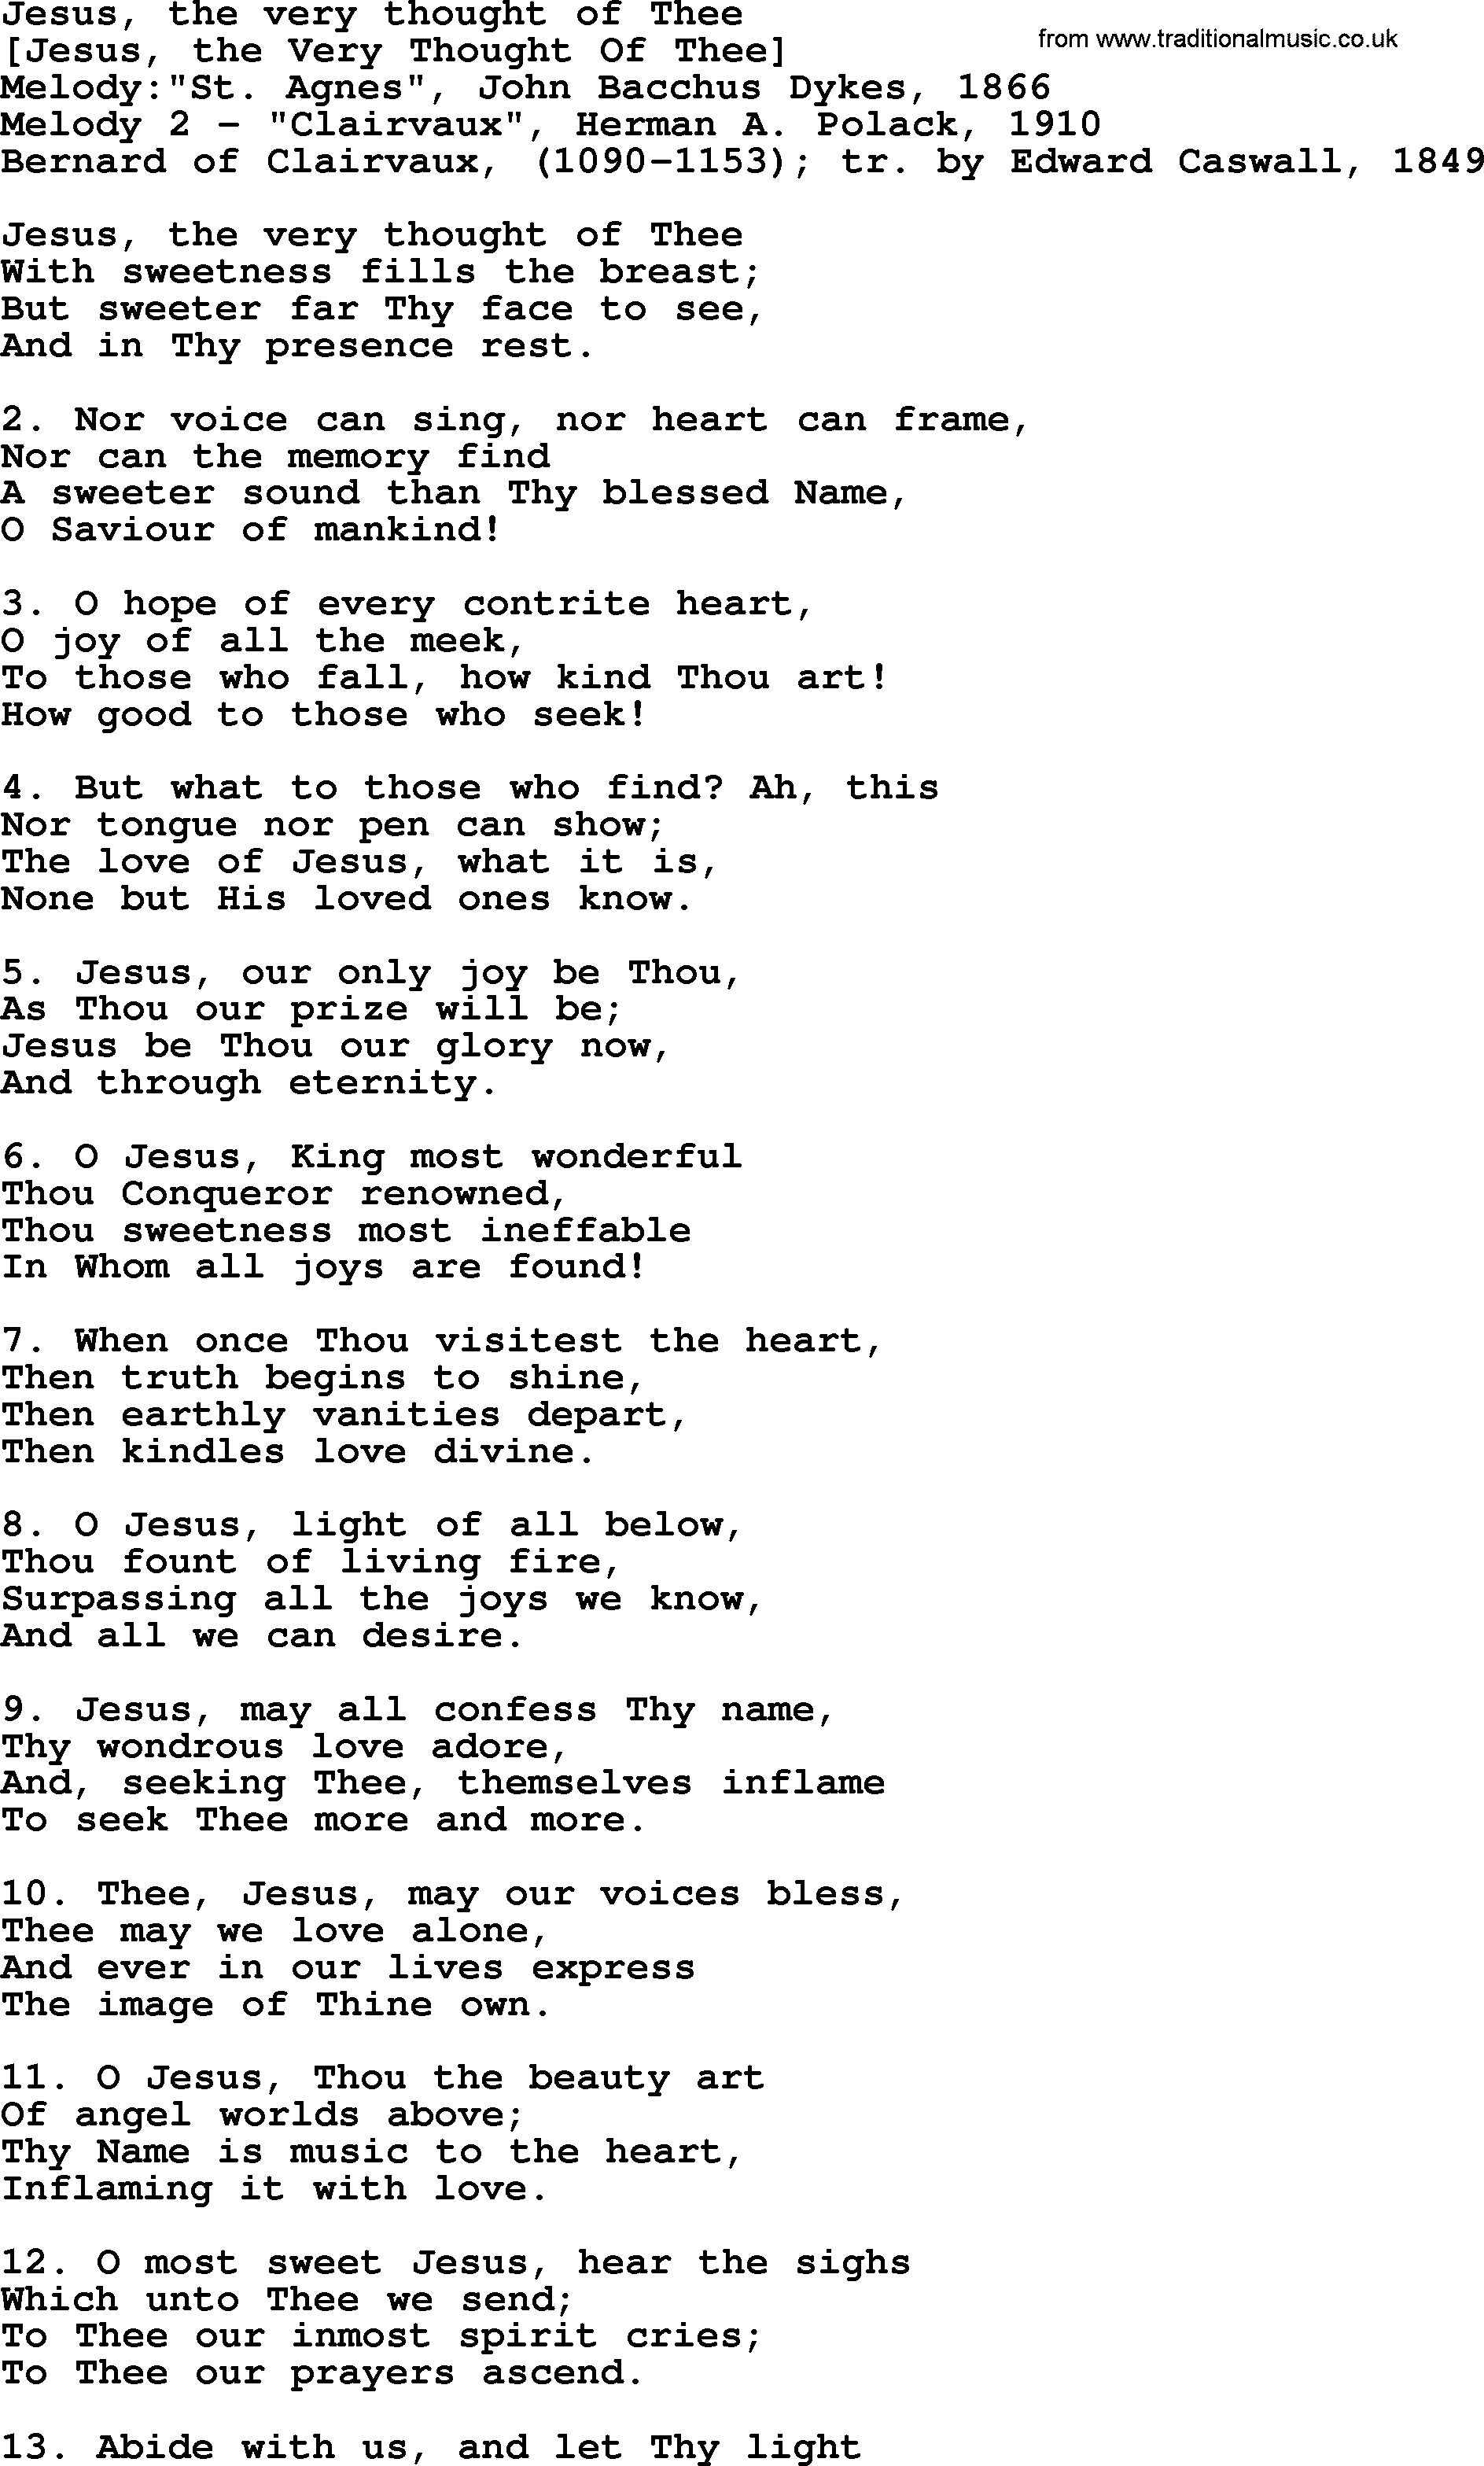 Old English Song: Jesus, The Very Thought Of Thee lyrics